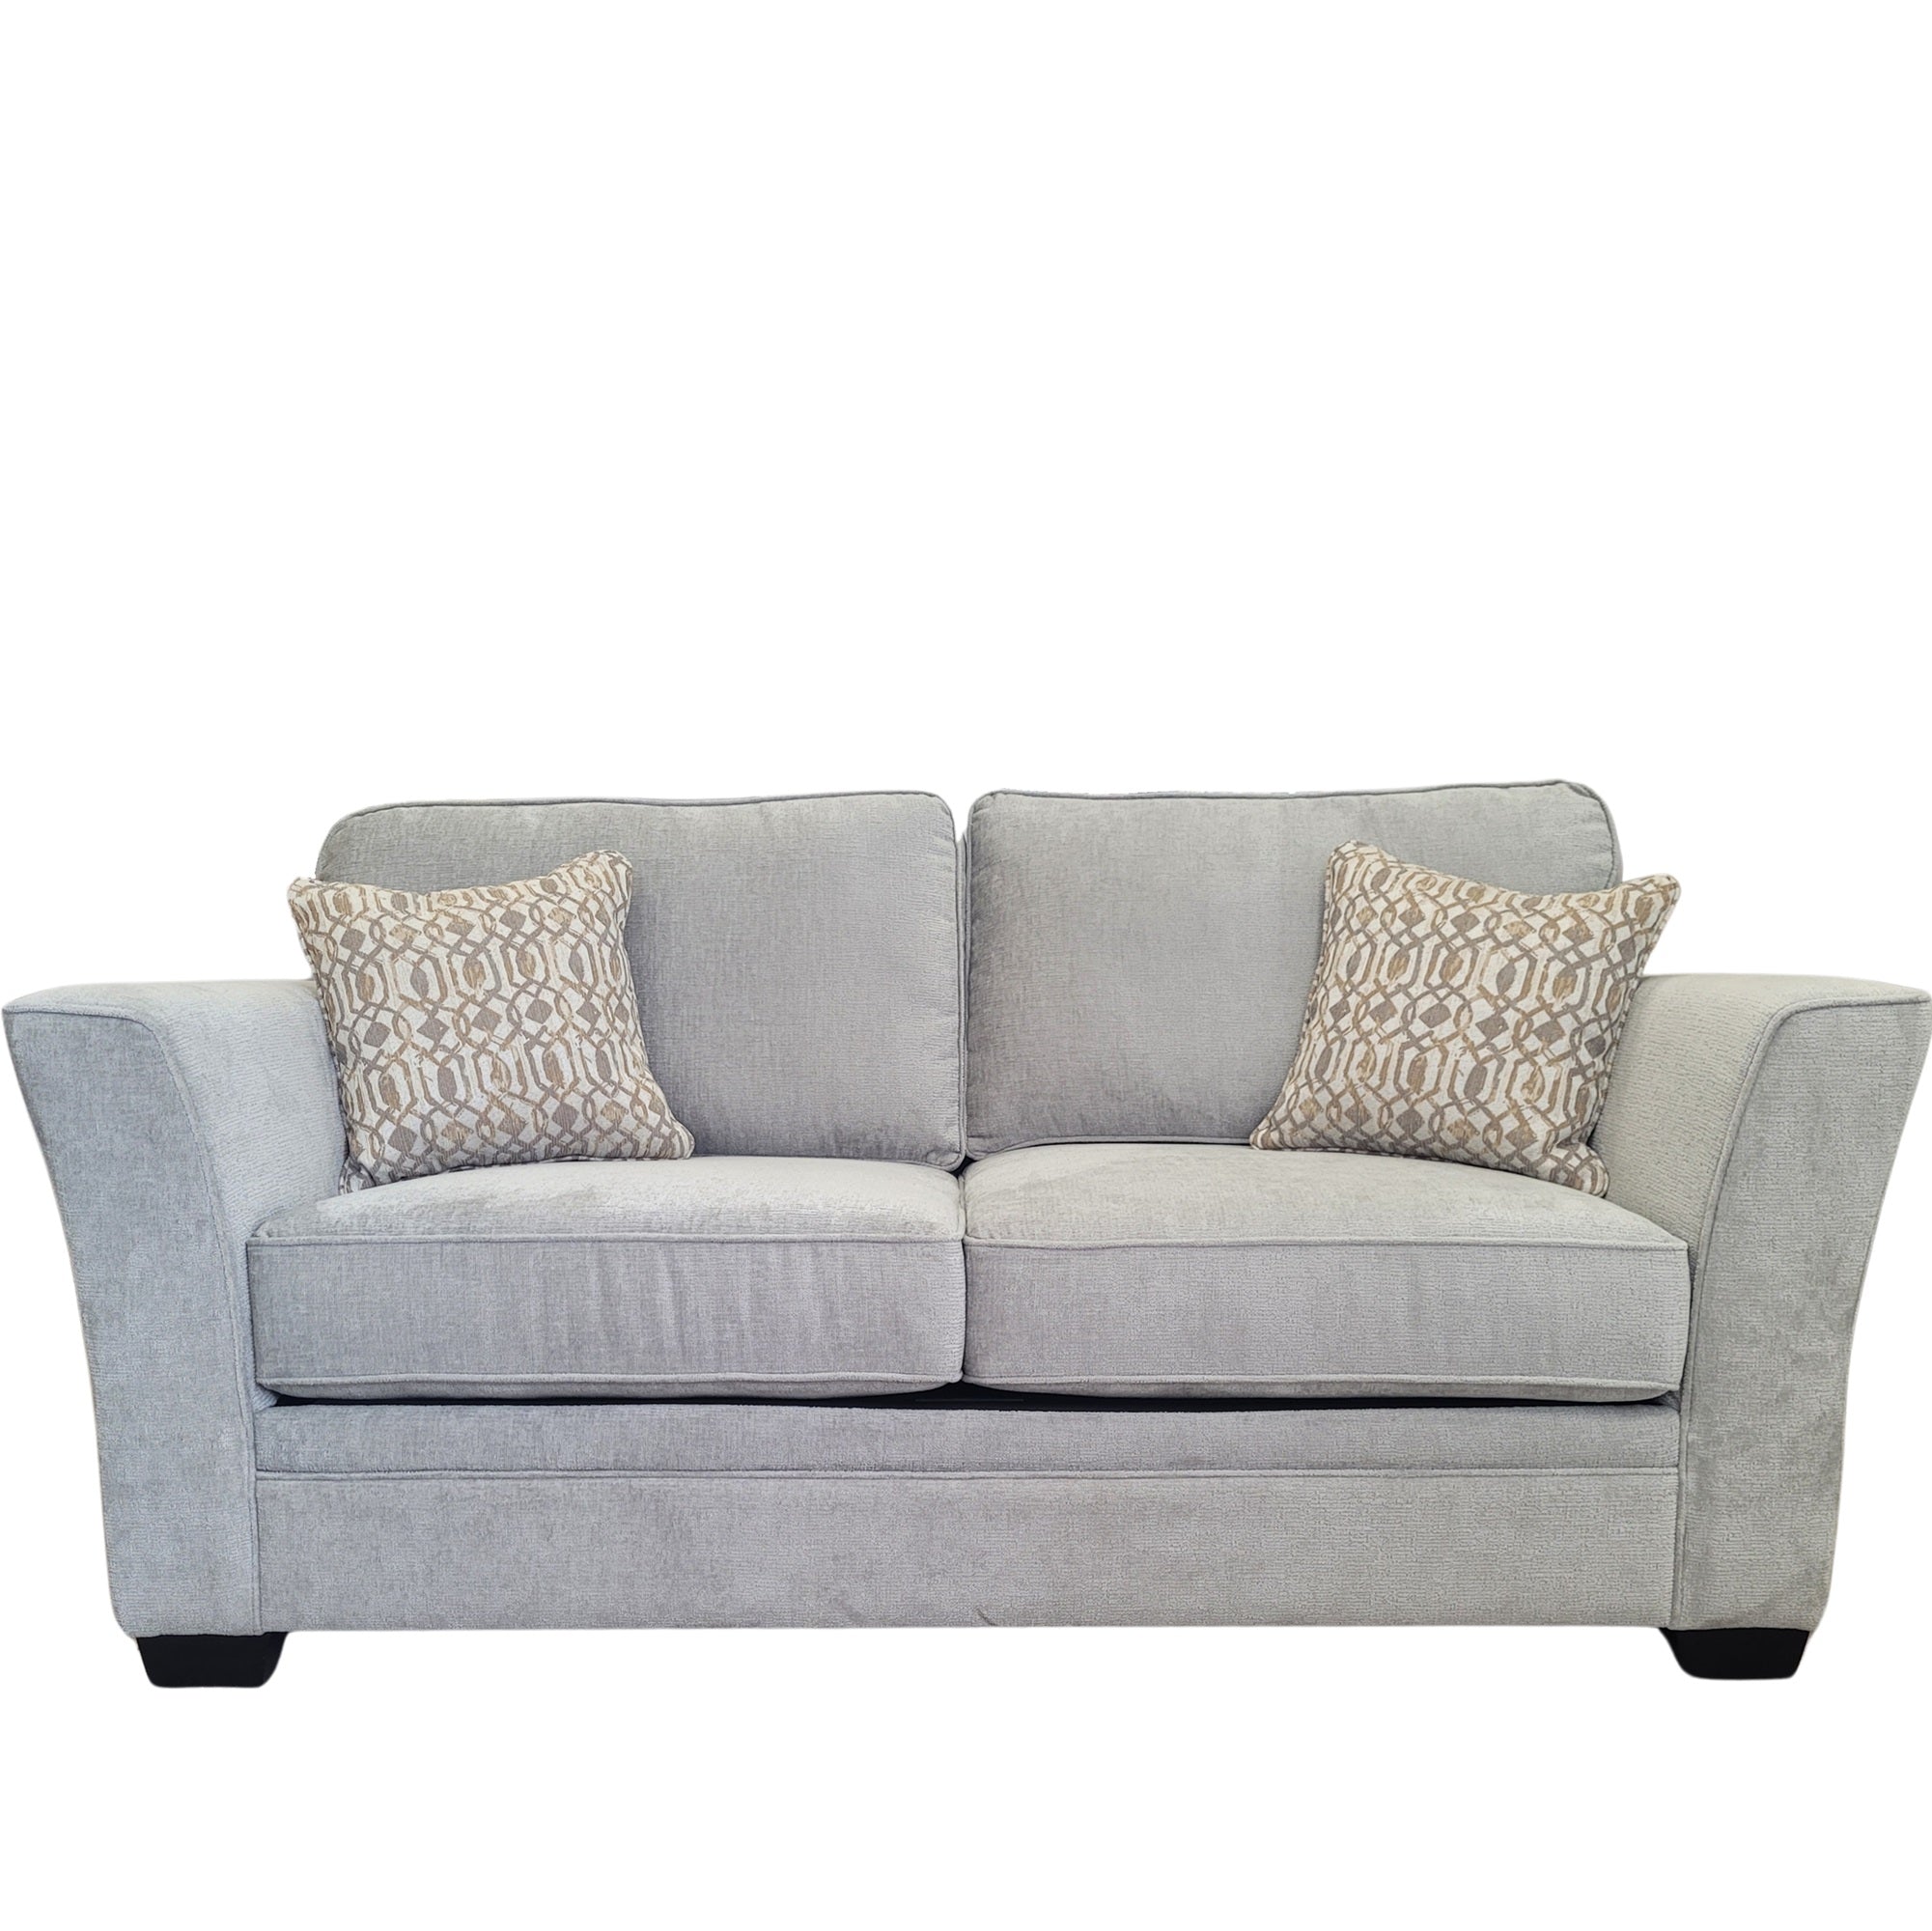 Madison Grey Fabric Sofabed with complimentary scatter cushions.